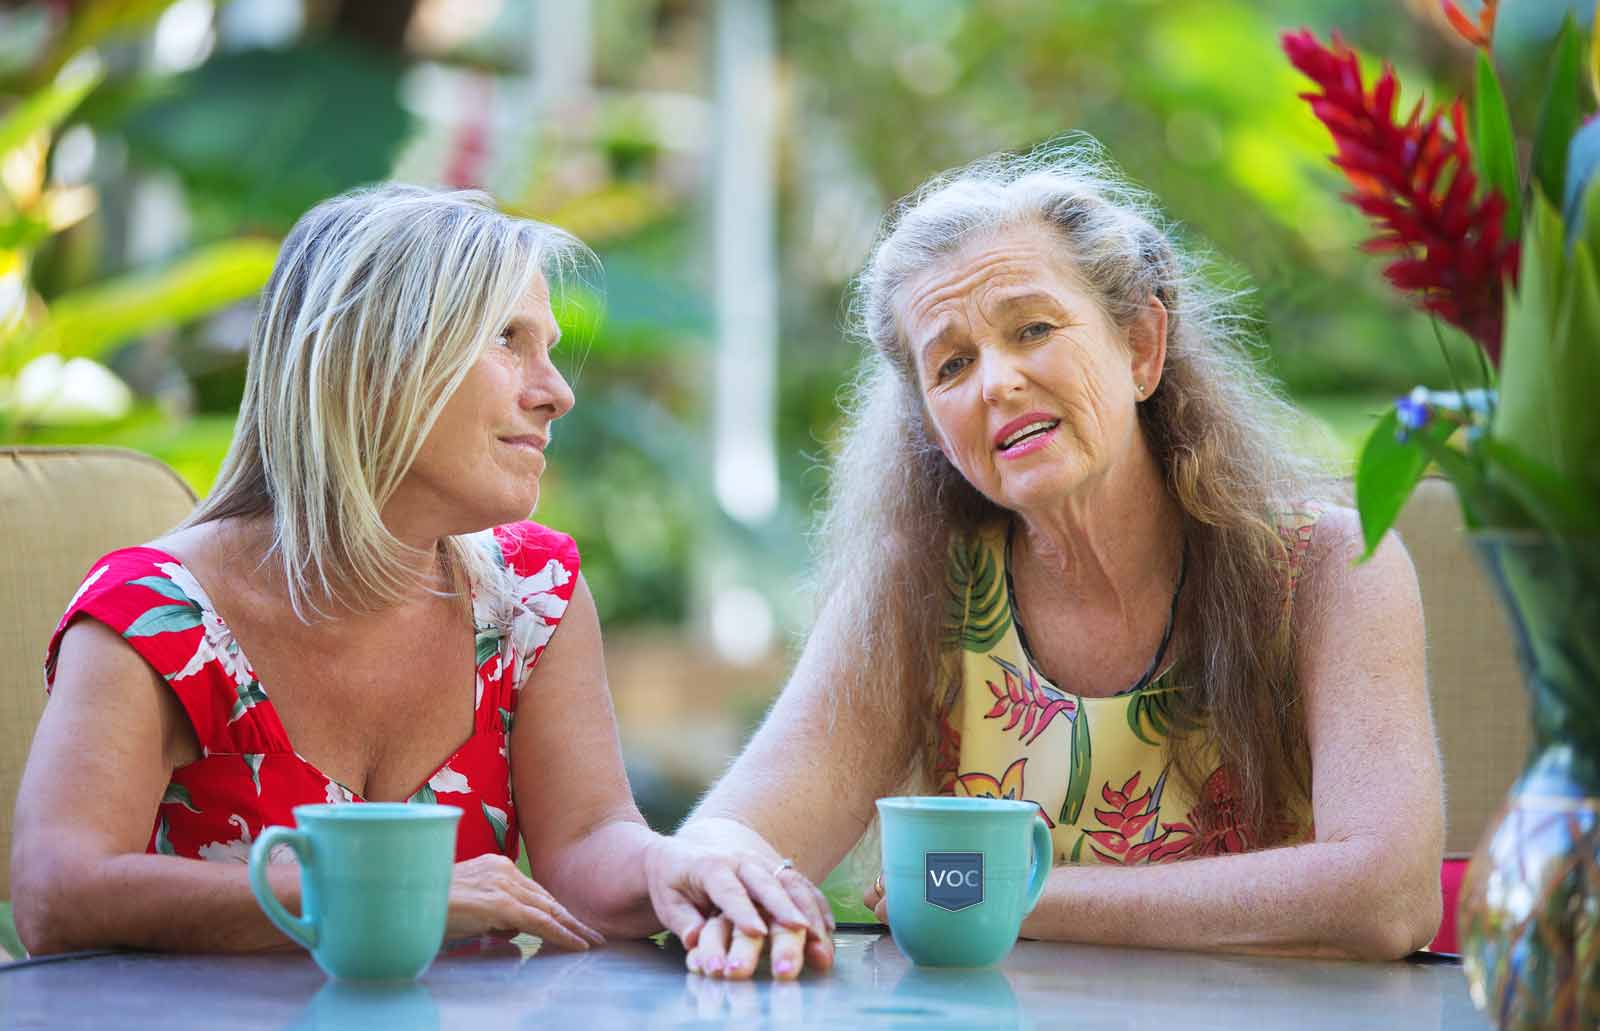 ladies-having-coffee-while-on-vacation-property-in-disbelief-by-way-resort-isn't-helping-timeshare-owners